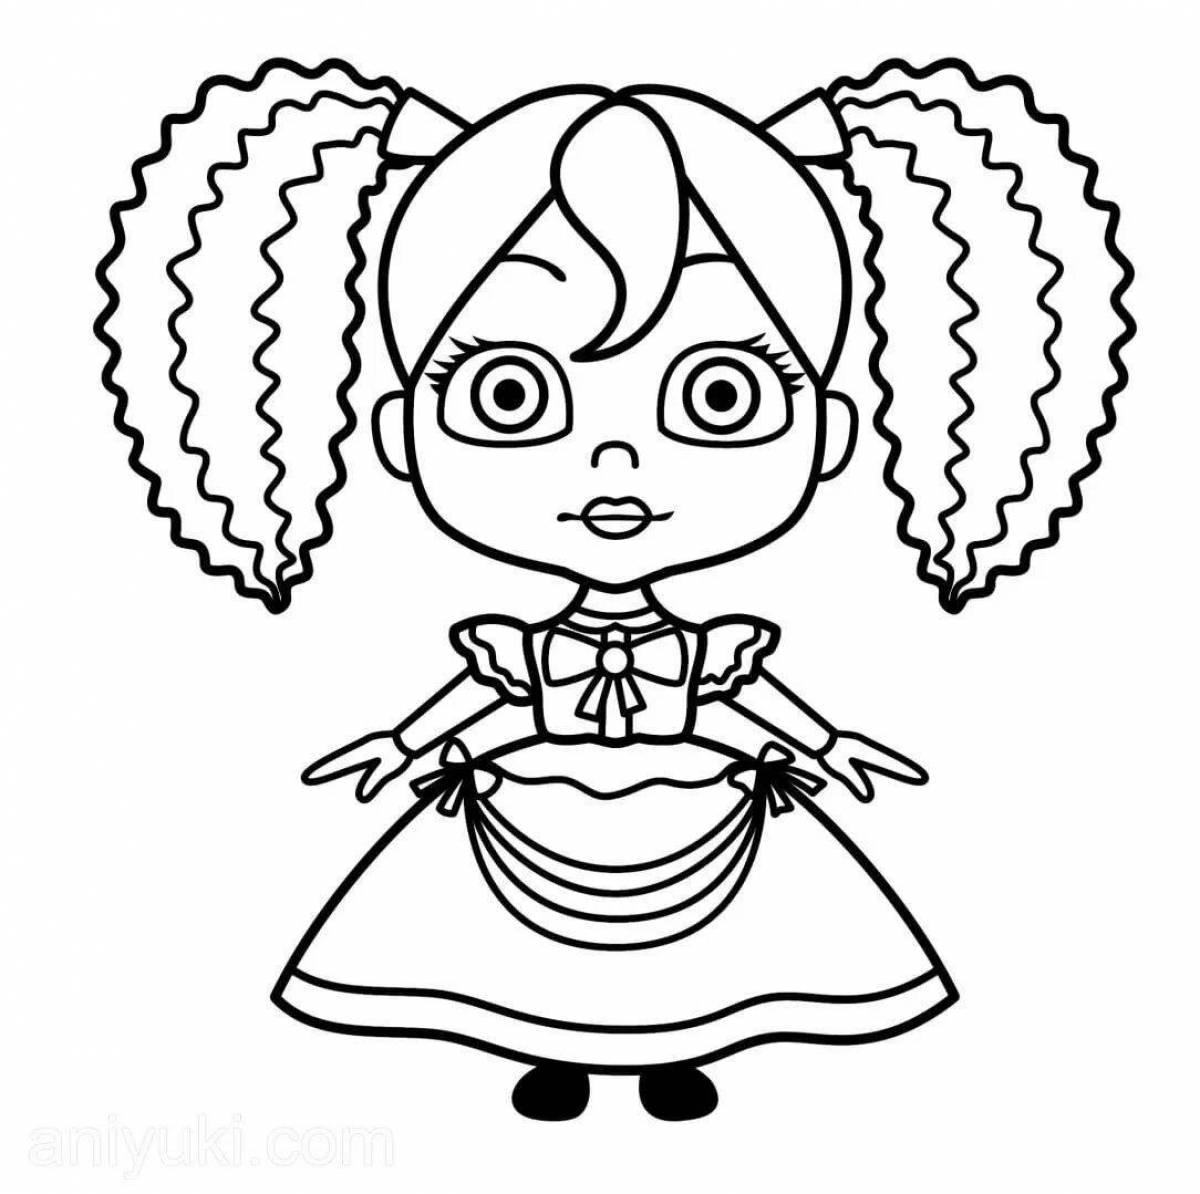 Attractive poppy playtime coloring page